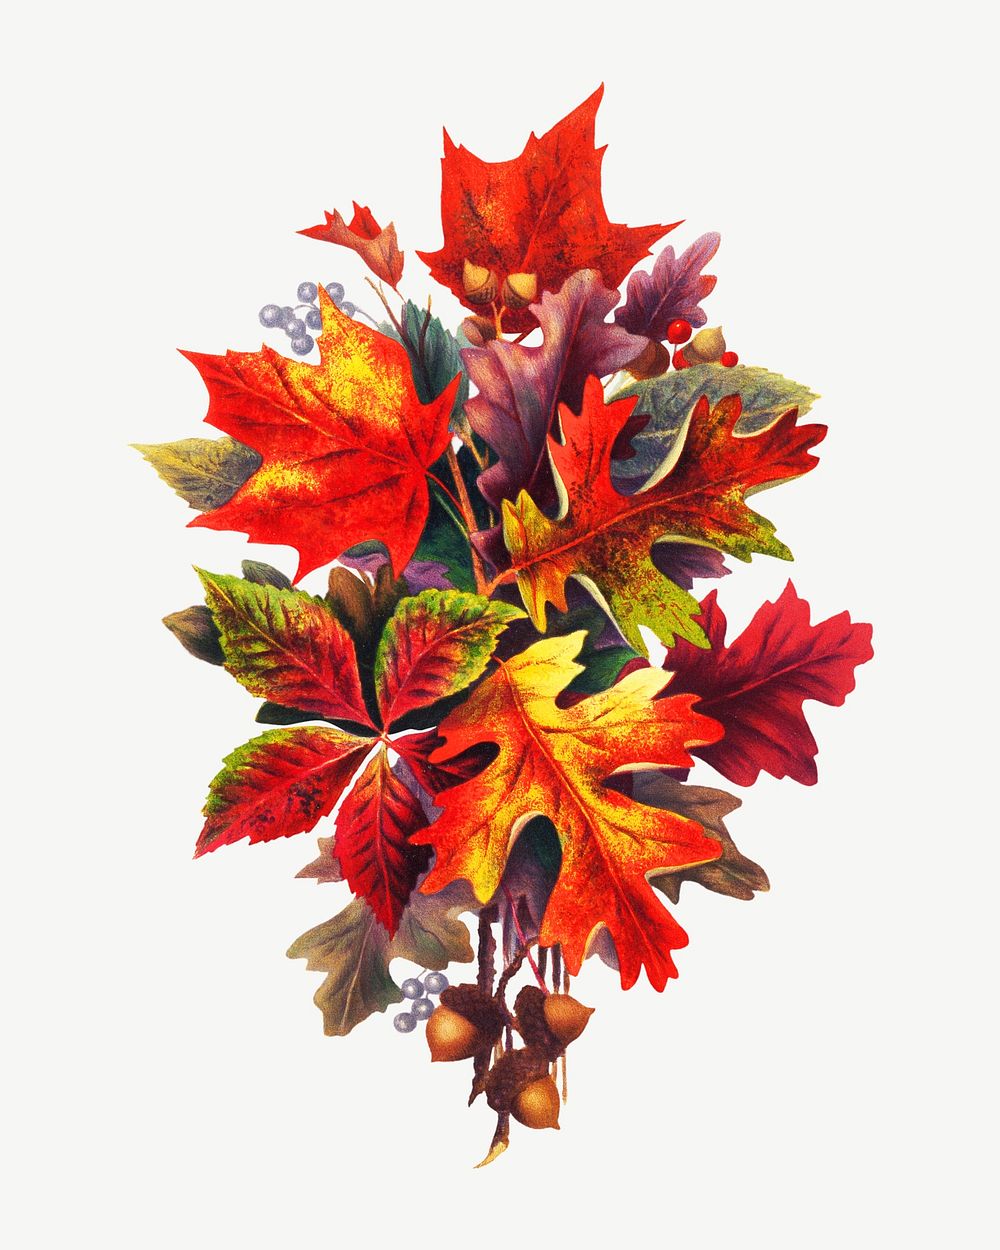 Autumn leaves, vintage botanical illustration by S. L. Bush psd. Remixed by rawpixel.